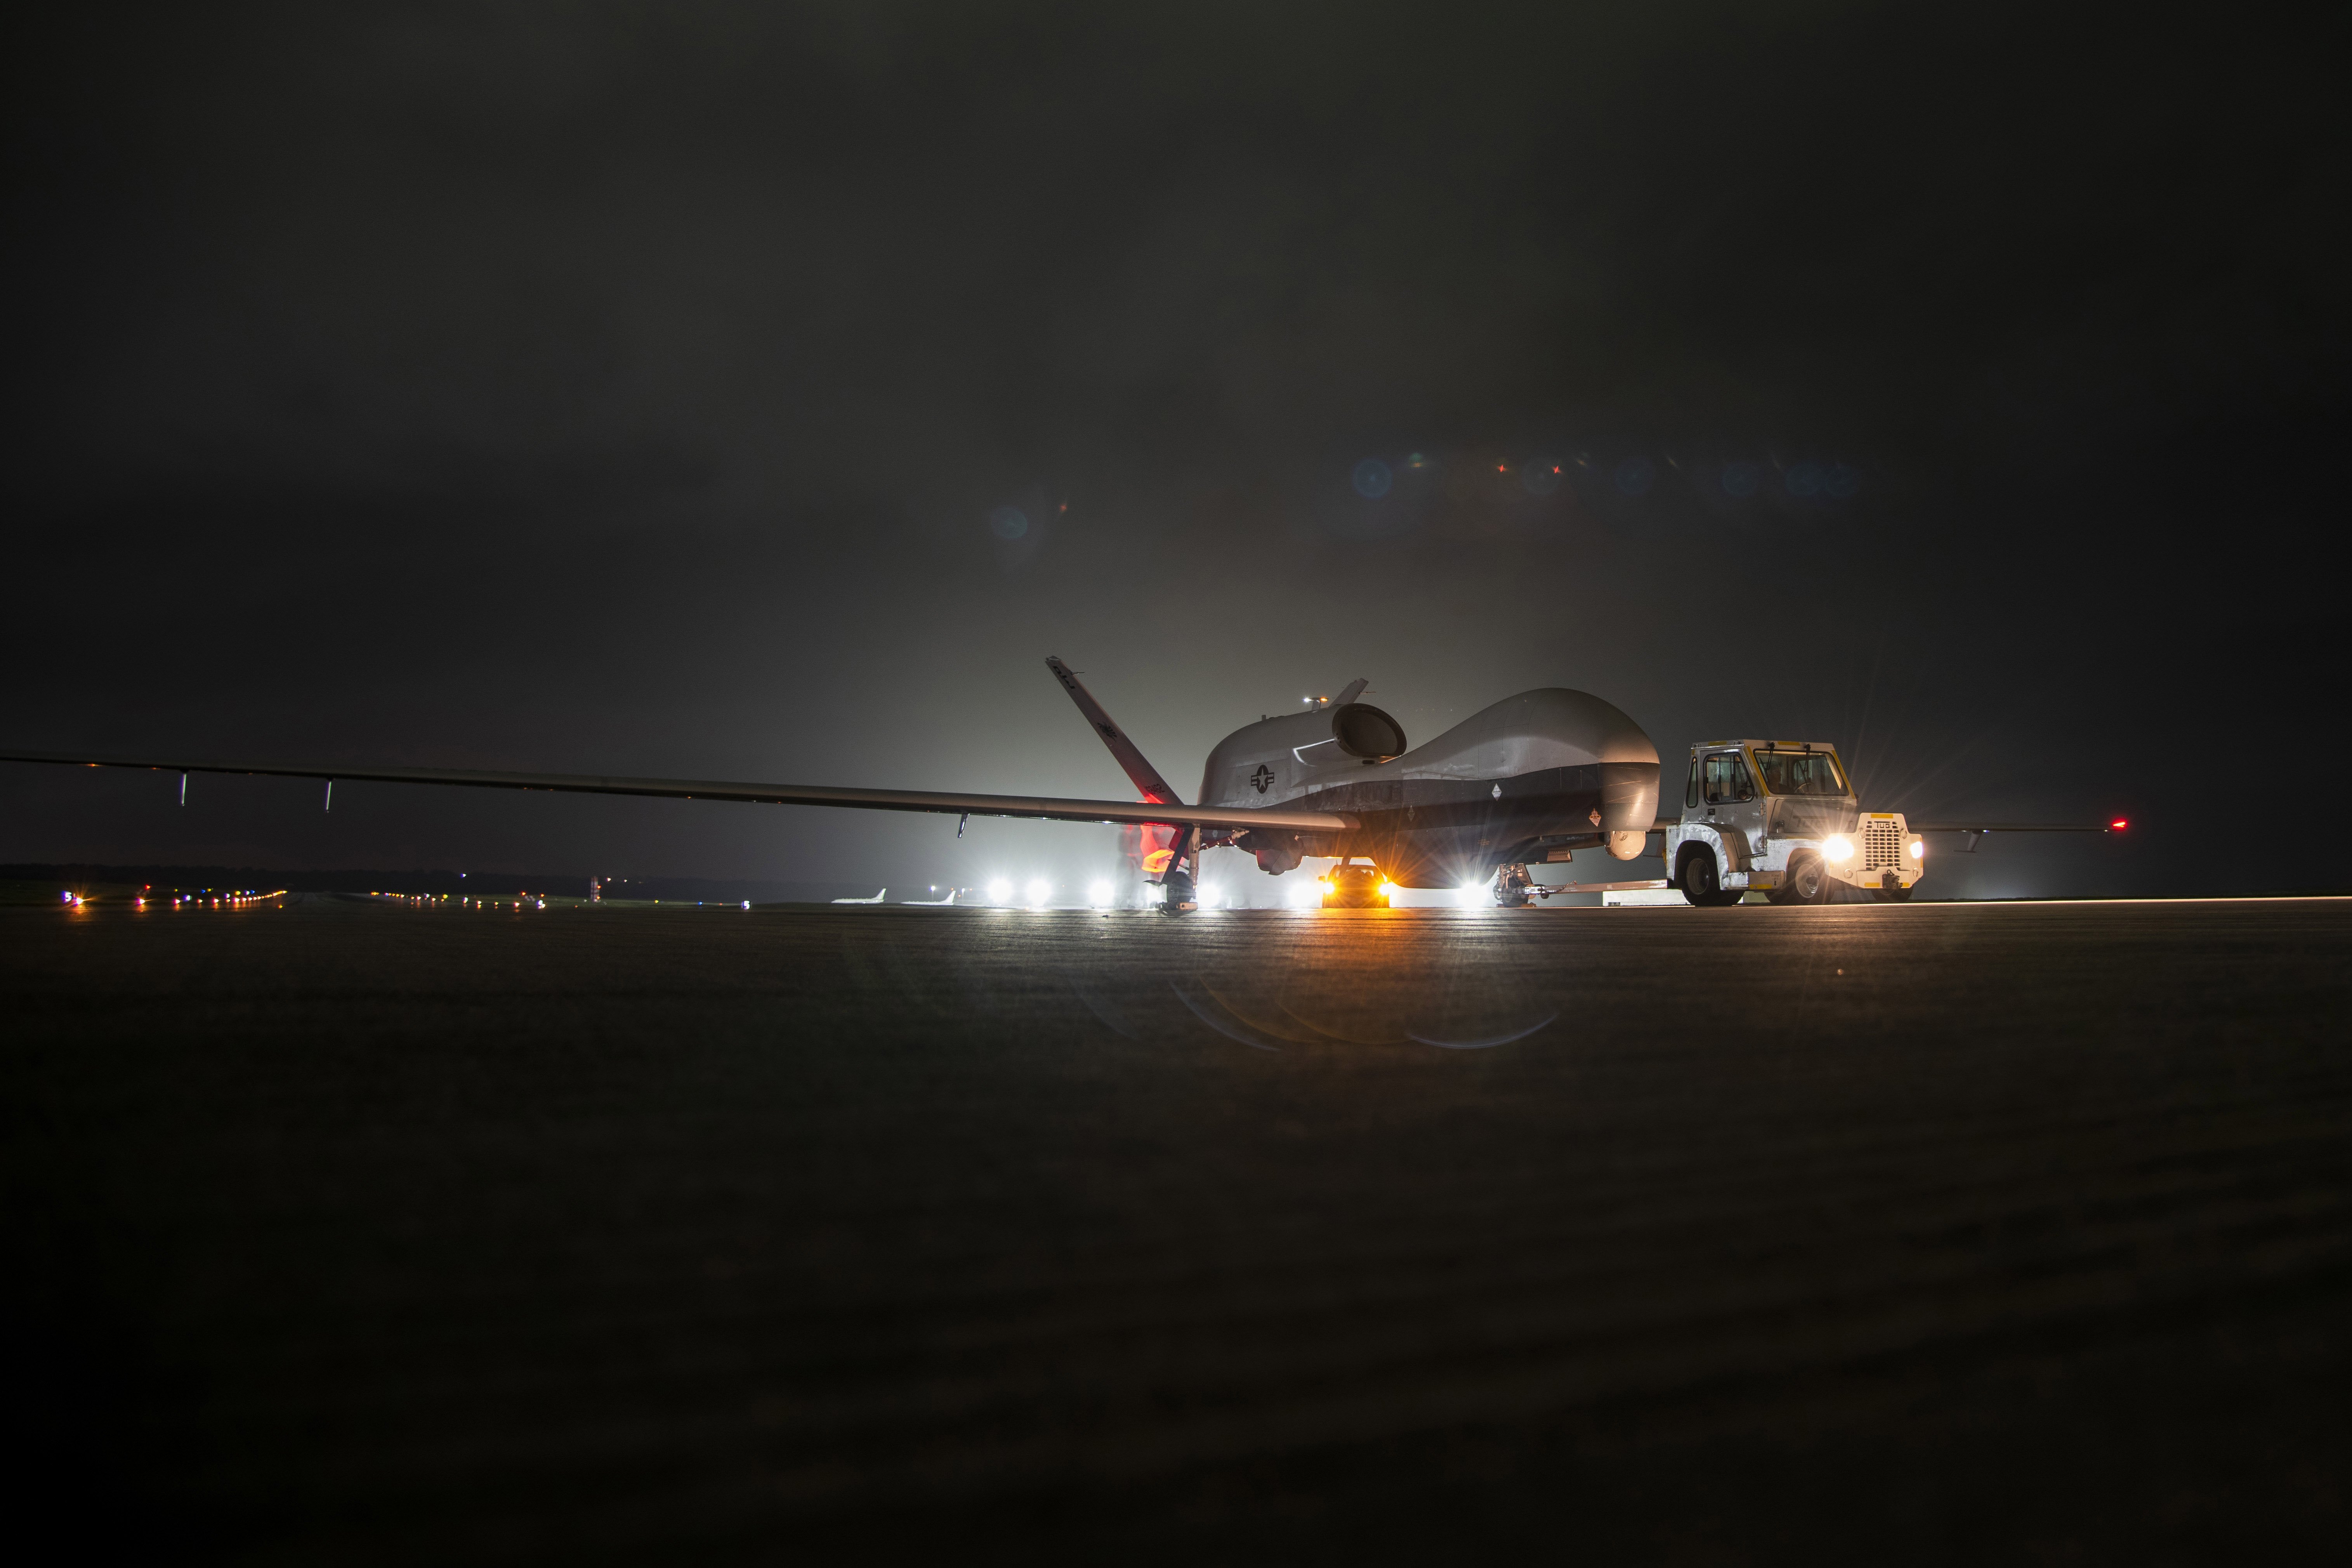 An MQ-4C Triton unmanned aircraft system (UAS) idles on a runway at Andersen Air Force Base, Guam after arriving for a deployment as part of an early operational capability (EOC) test.